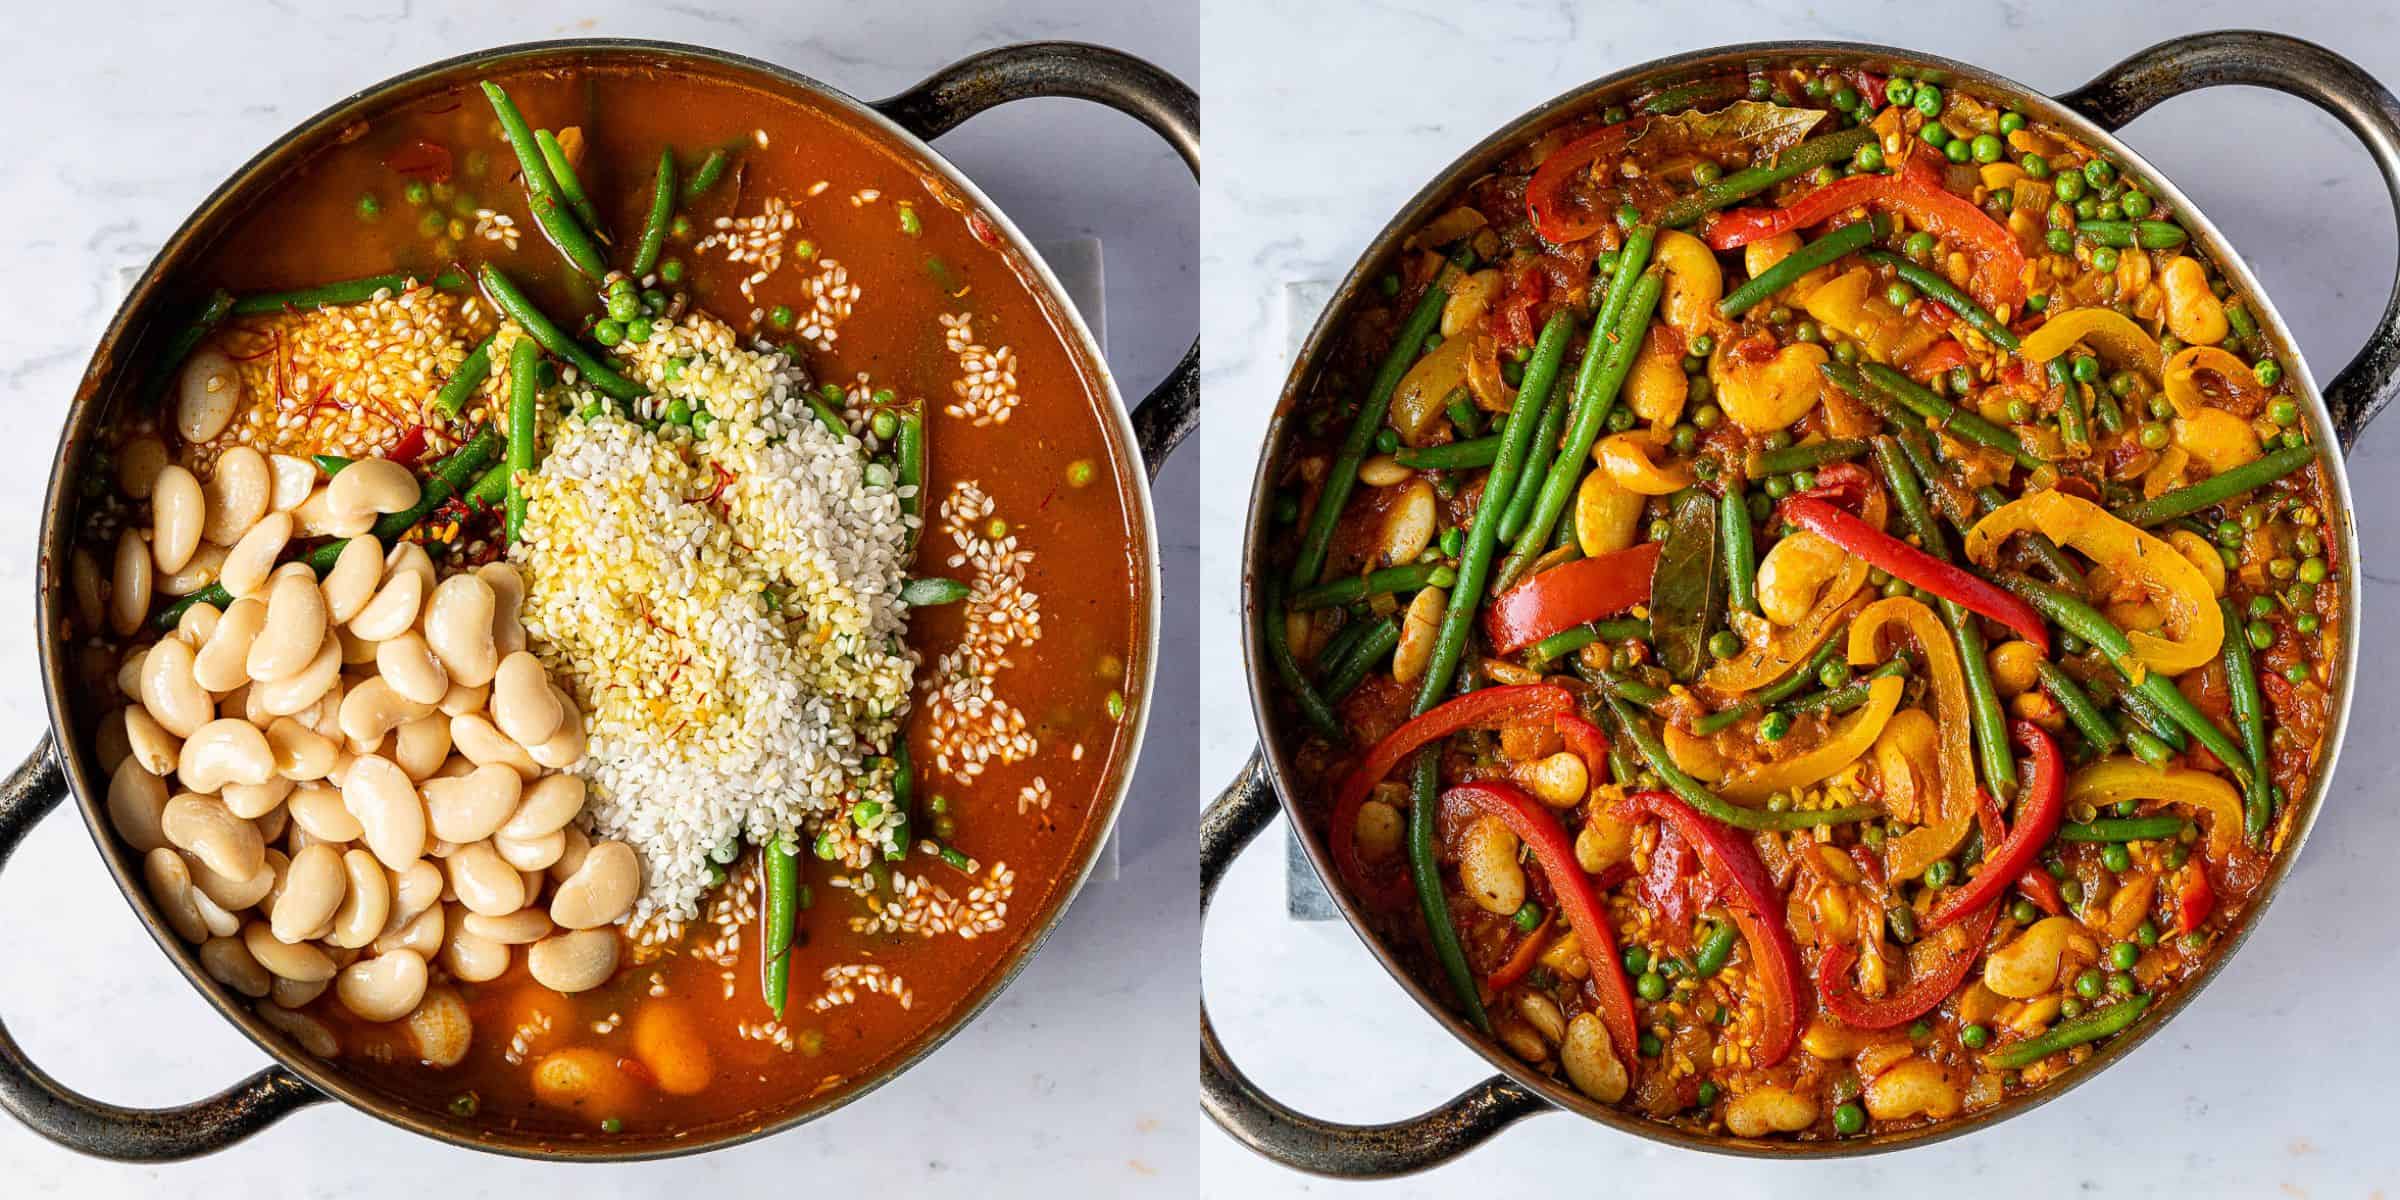 A two image collage of adding the rice and vegetables and cooking the paella.